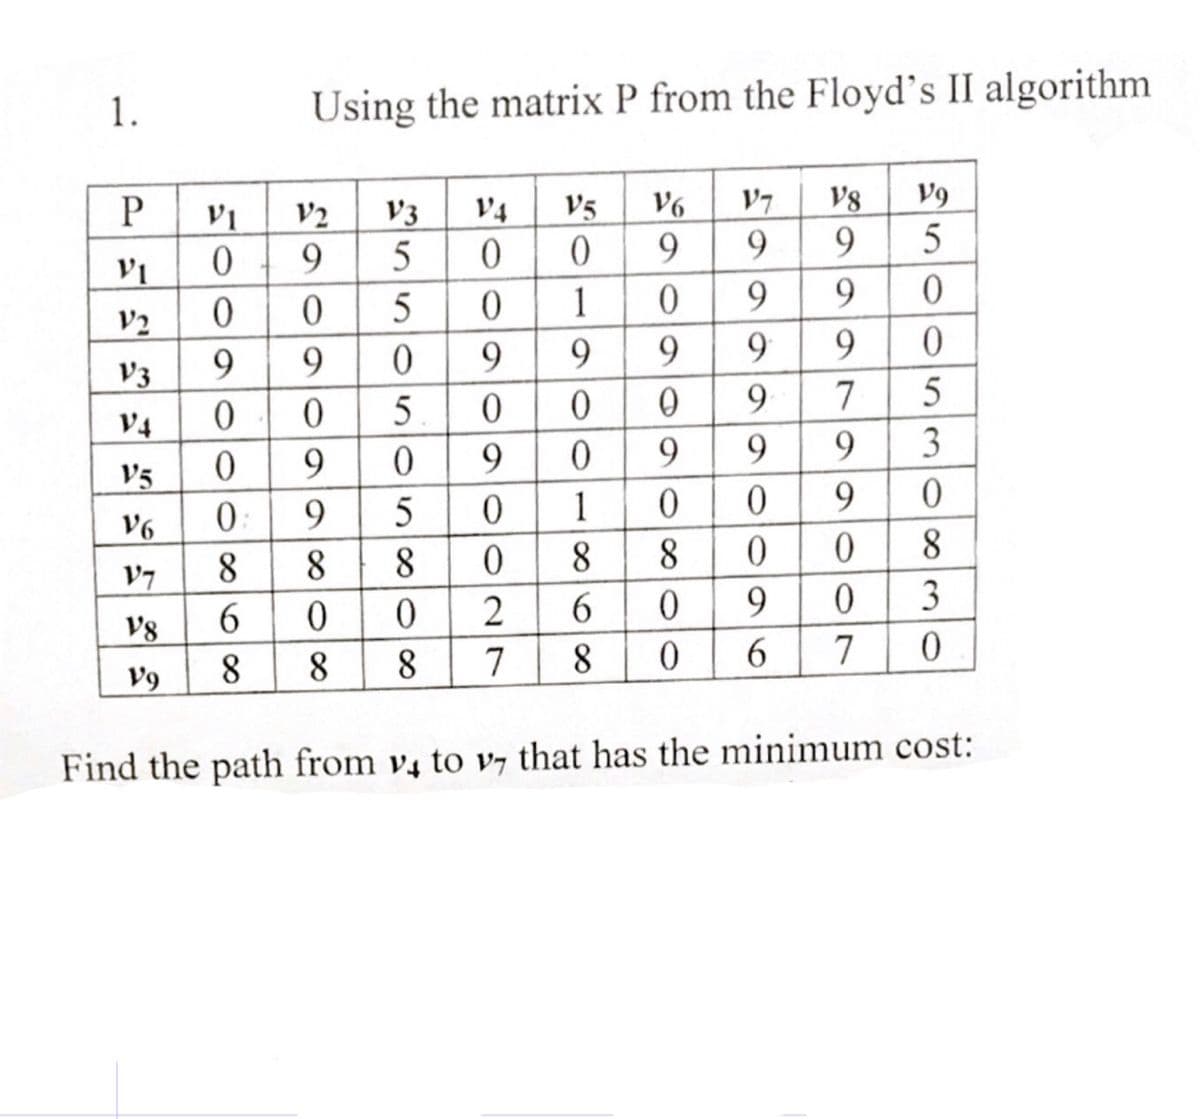 1.
P
VI
V2
V3
V4
V5
V6
V7
V8
V9
Using the matrix P from the Floyd's II algorithm
V2
9
VI
0
0
9
0
09
0:
9
8
8 8
6
0 0
8
8
8
0
9
0
V3
5
5
0 9
5
0
0 9
V4
0
0
5 0
0
2
7
V6
9
0
9
0
0
9
1 0
8 8
V5
0
1
9
0
6
8
0
0
V7
9
9
9
V8
9
9
9
9
9
7
9
0
9
0
0
9
0
6 7
V9
5308OOS
3
0
Find the path from v4 to v that has the minimum cost: